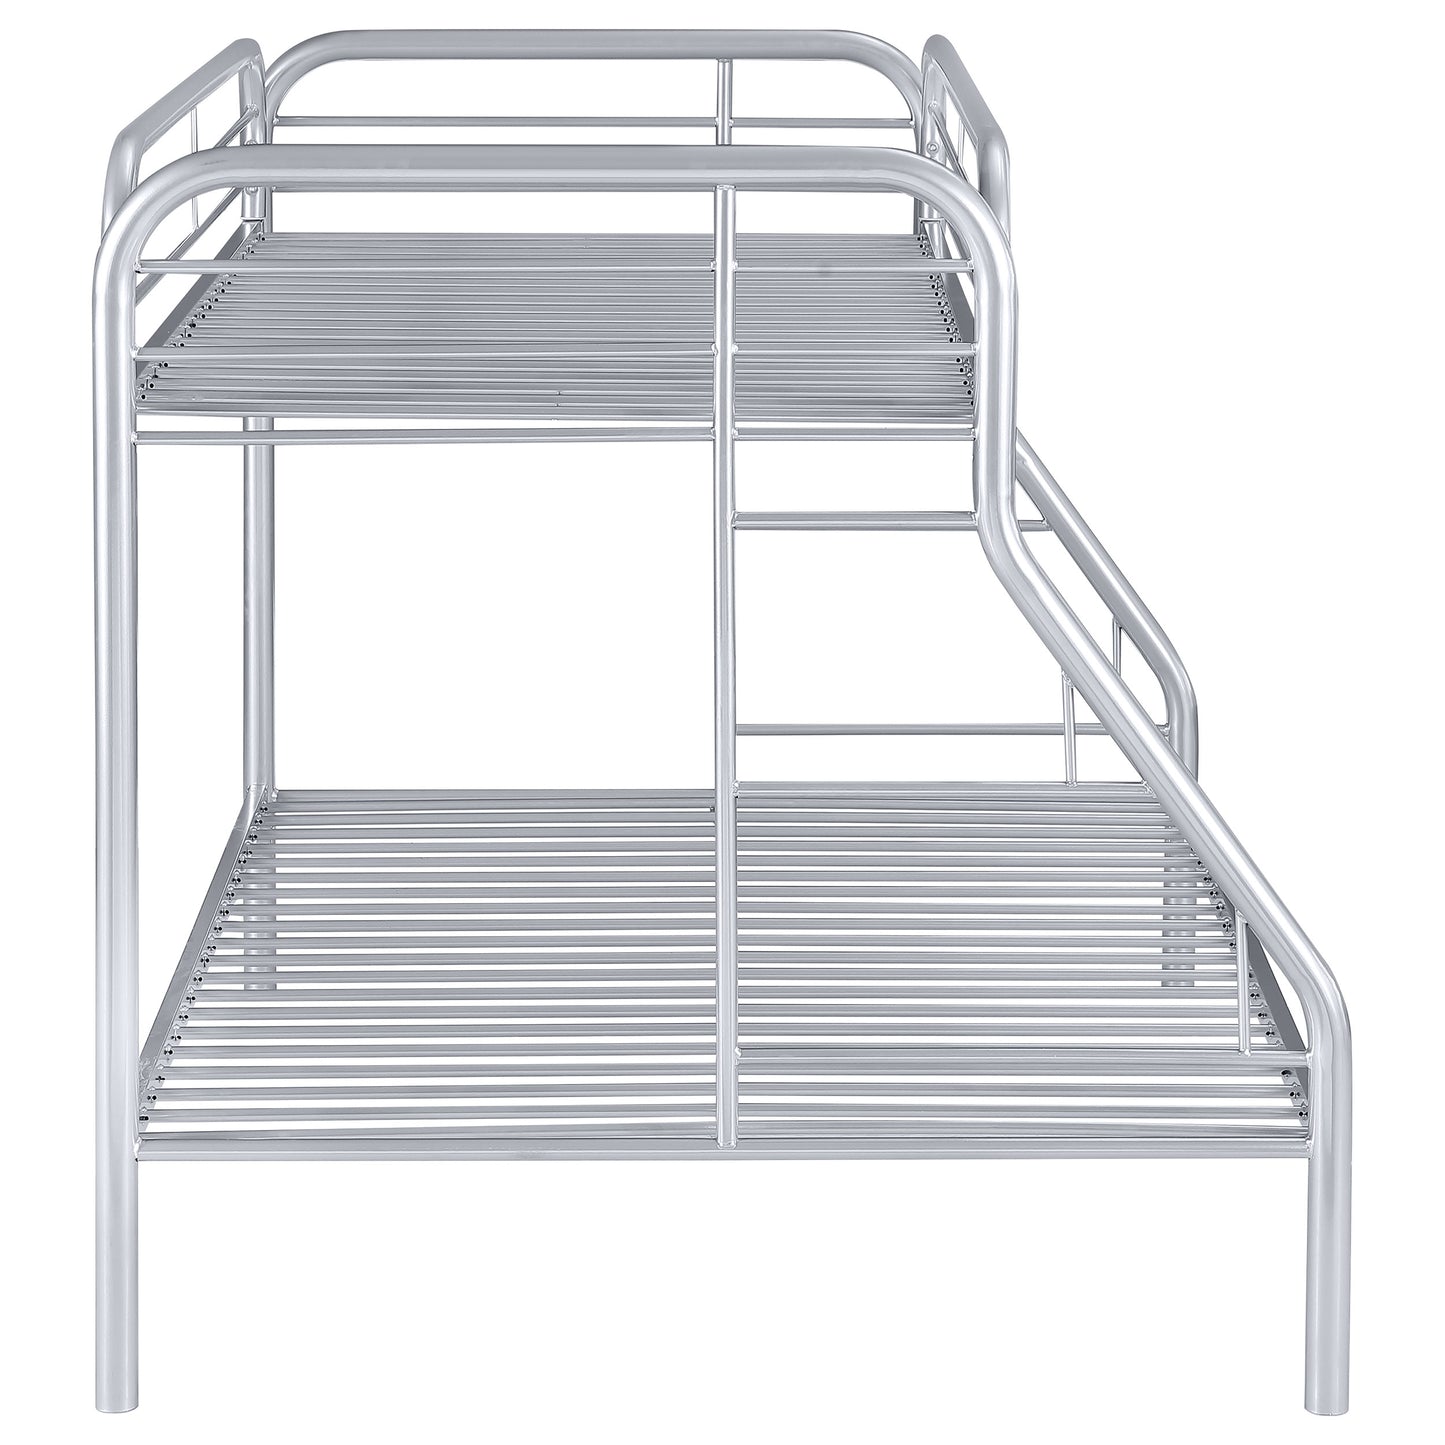 Morgan Twin Over Full Bunk Bed Silver